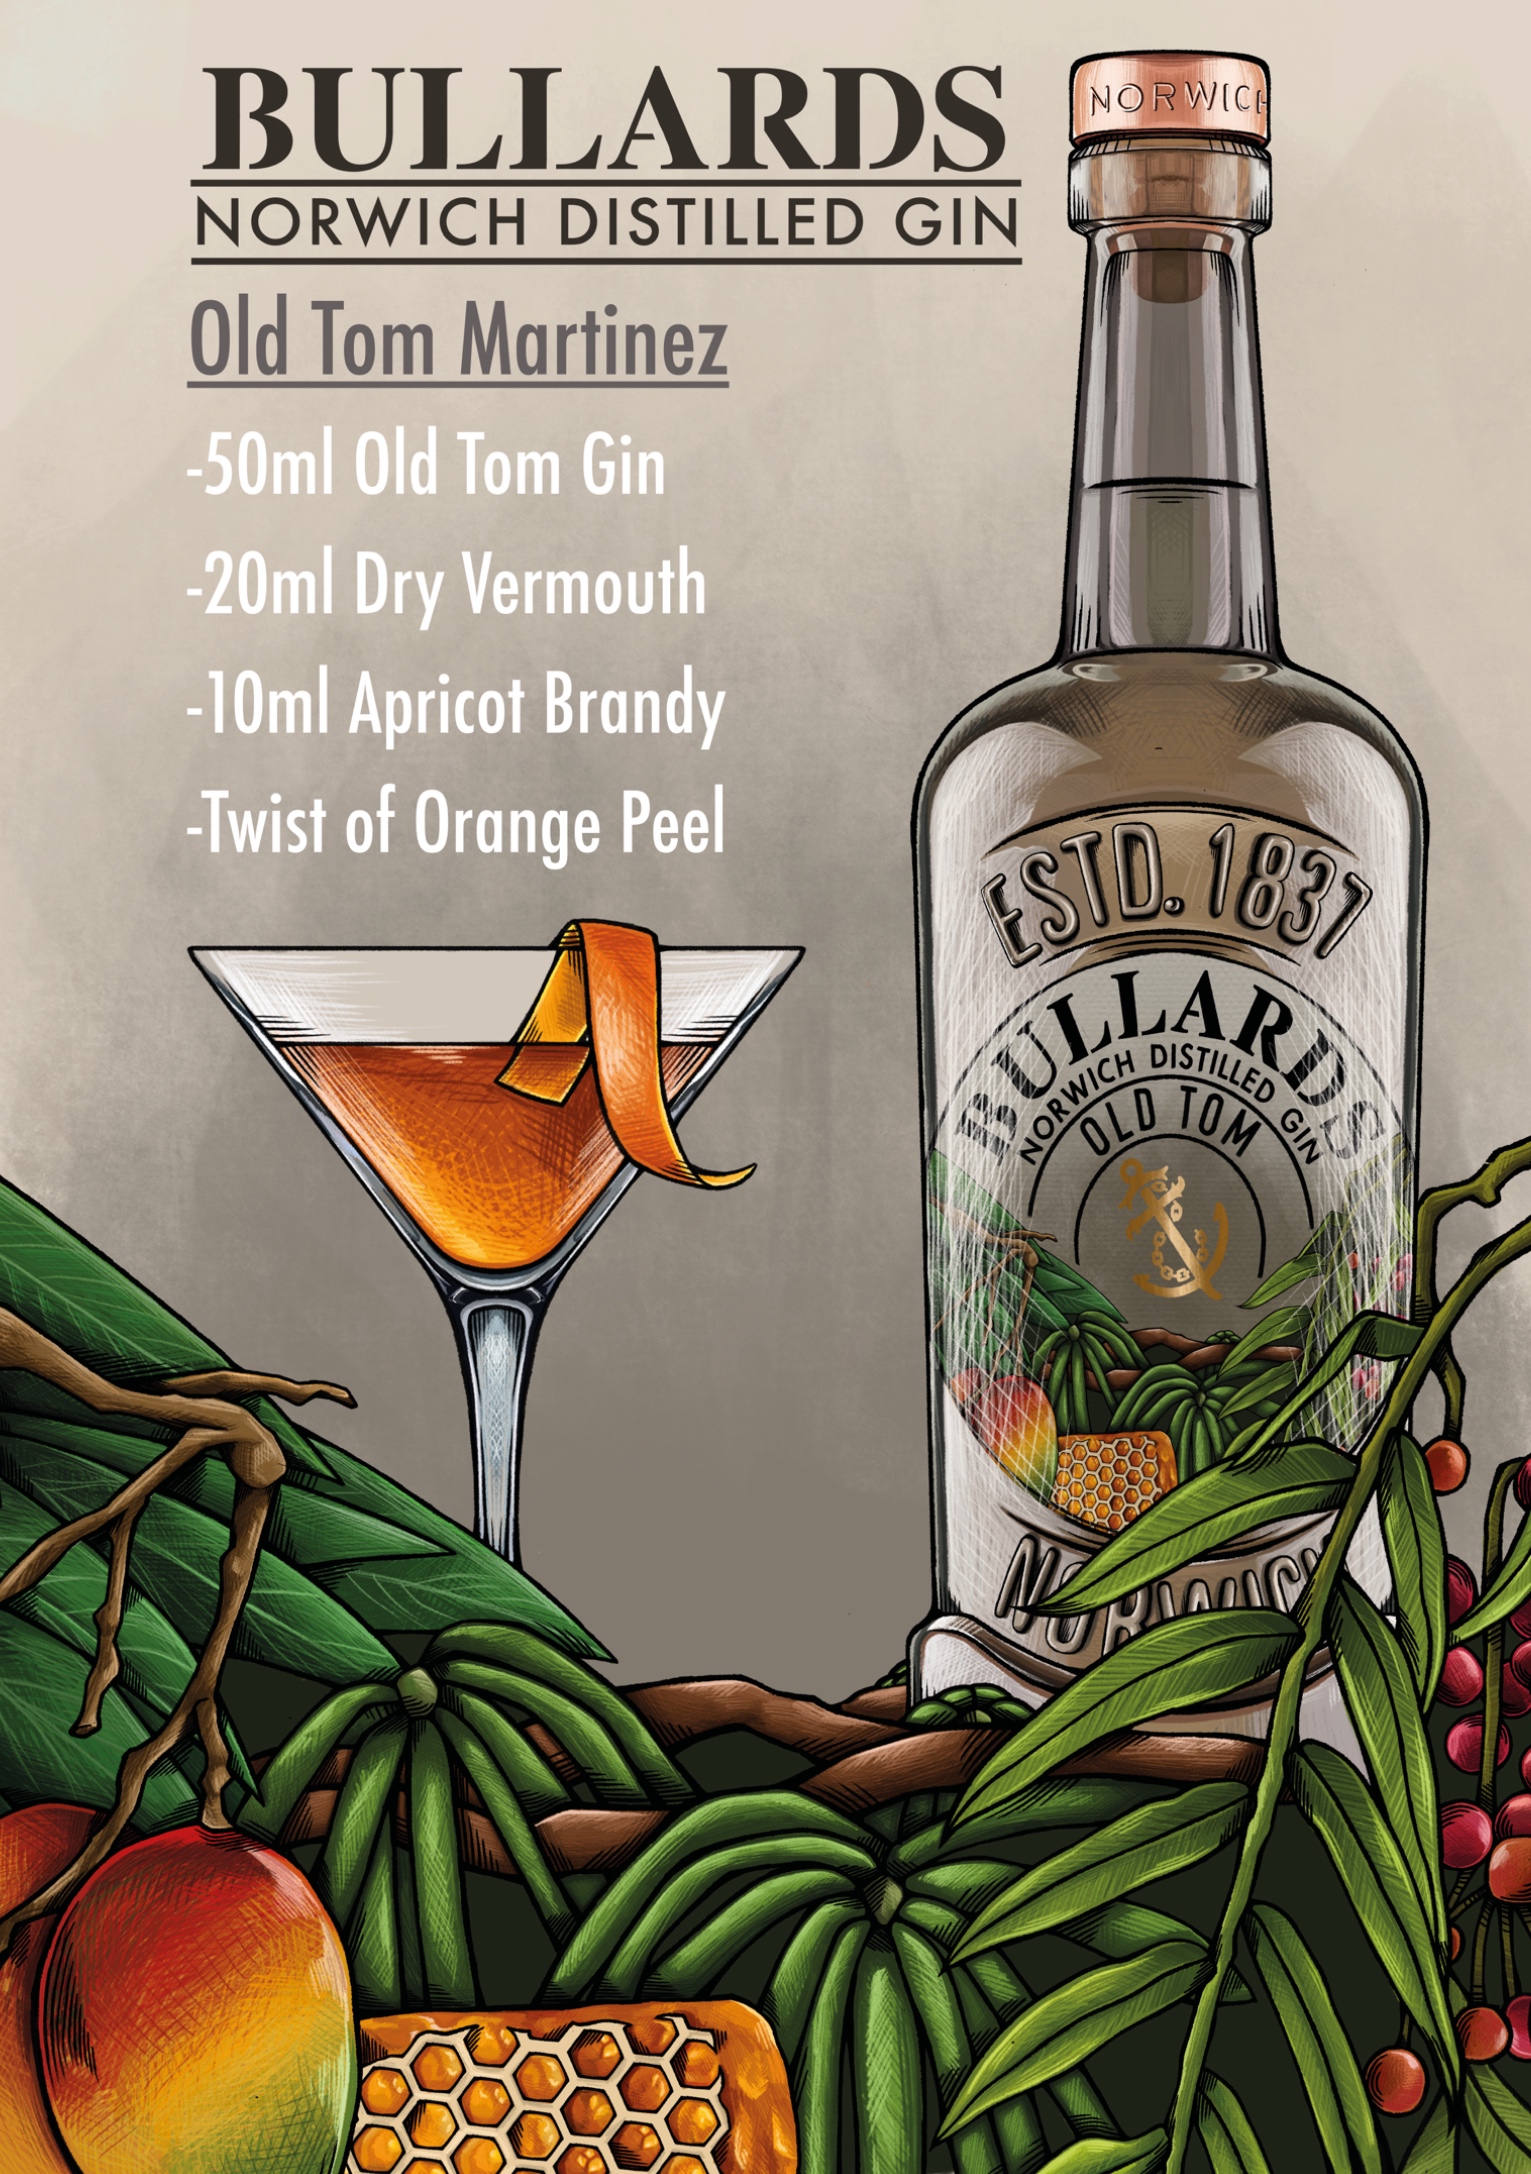 BA Illustration work by Elliott Adams, Showing a Poster created for Bullards Gin, featuring a clear bottle of Bullard's gin, an orange cocktail in a martini glass, surrounded by foliage and fruits. Above the glass is the cocktail recipe.